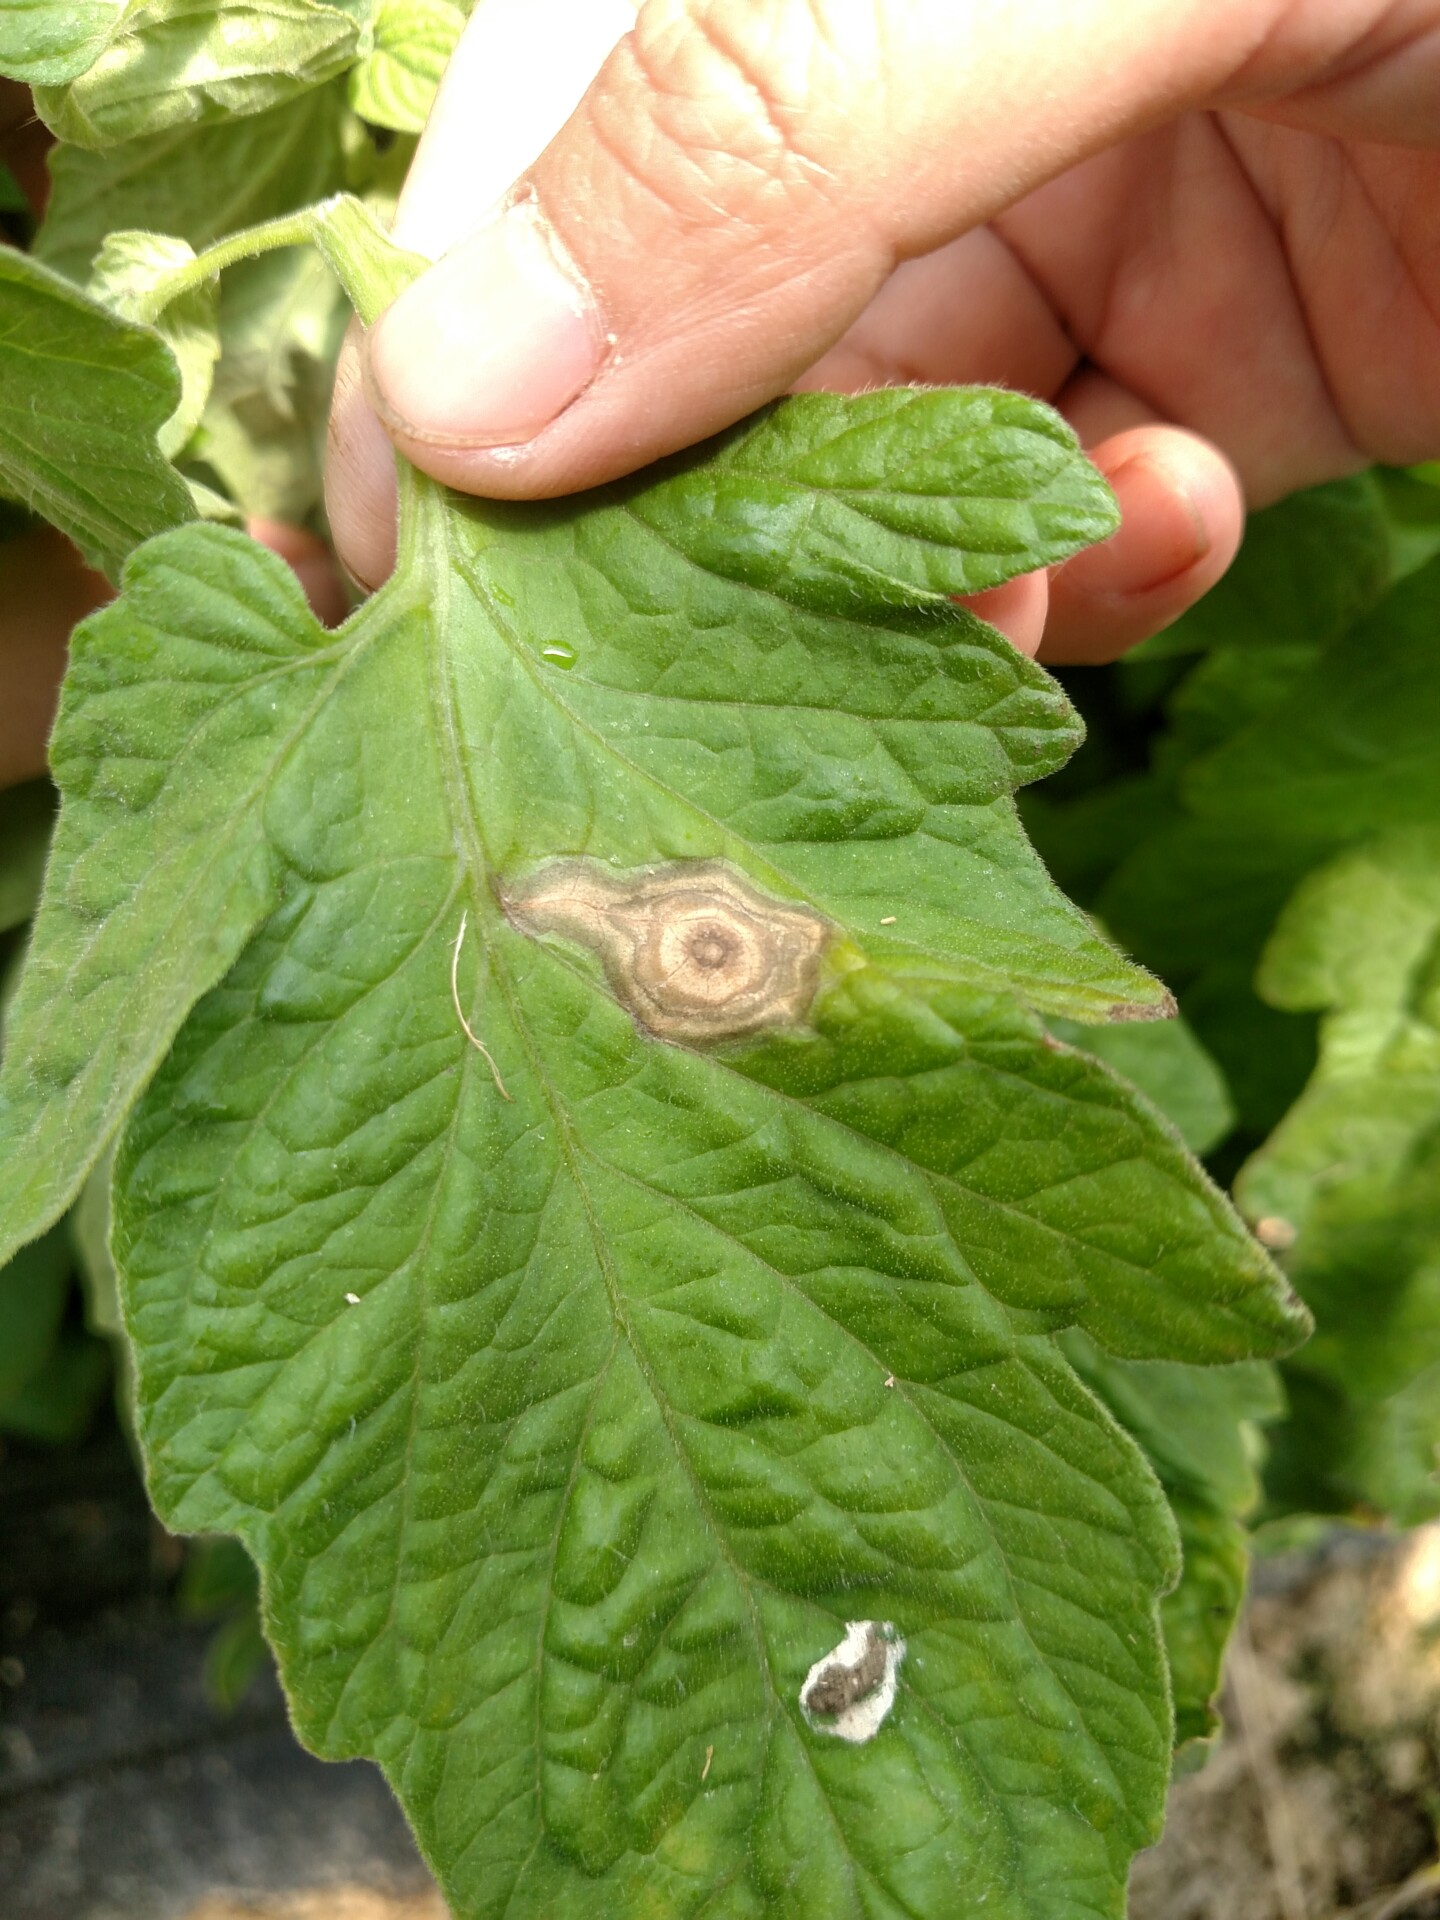 Figure 11. Lesion of gray mold on tomato leaf. Note ring structure.